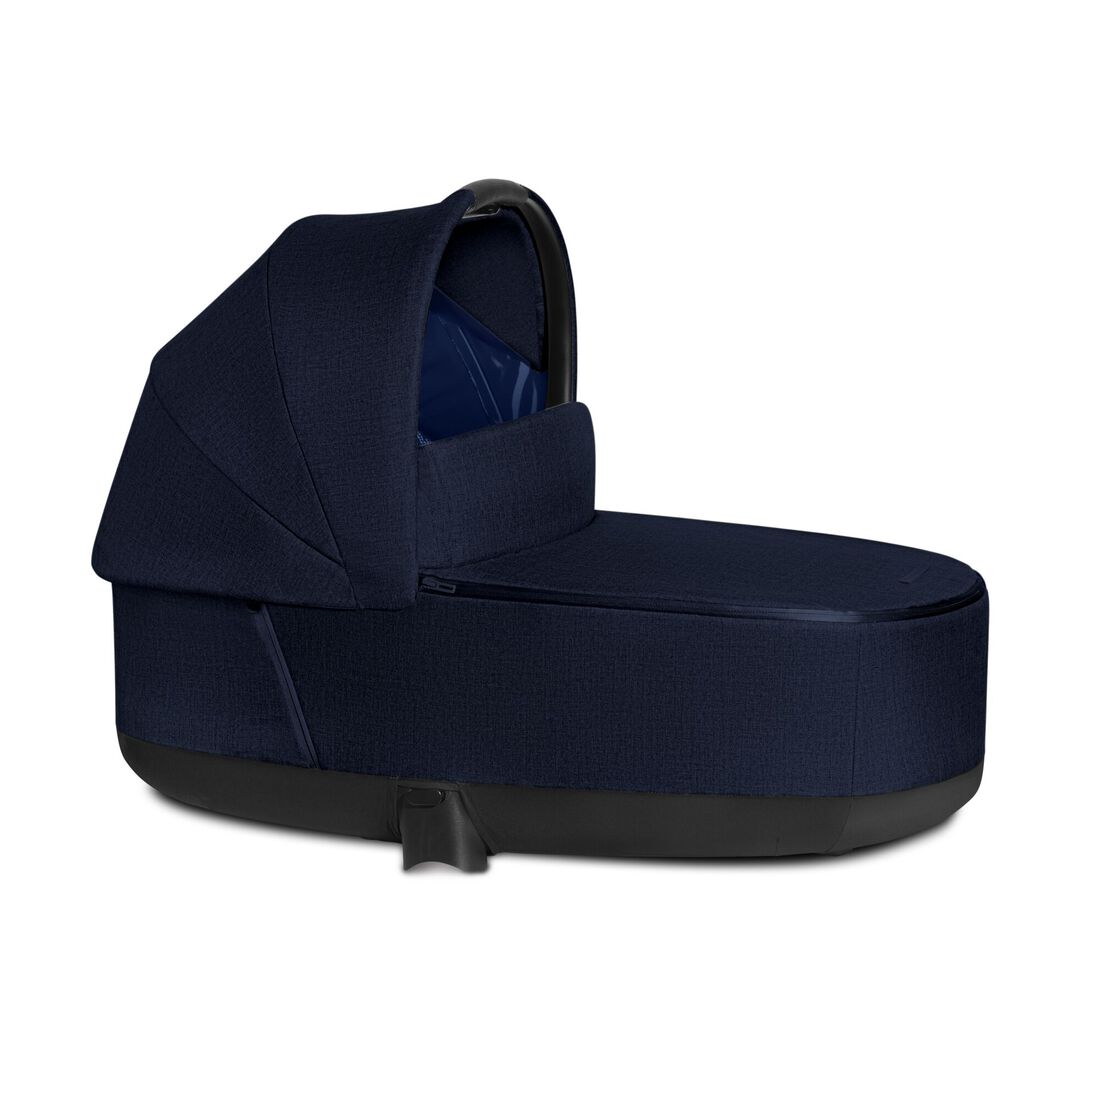 CYBEX Priam 3 Lux Carry Cot - Midnight Blue Plus in Midnight Blue Plus large image number 1